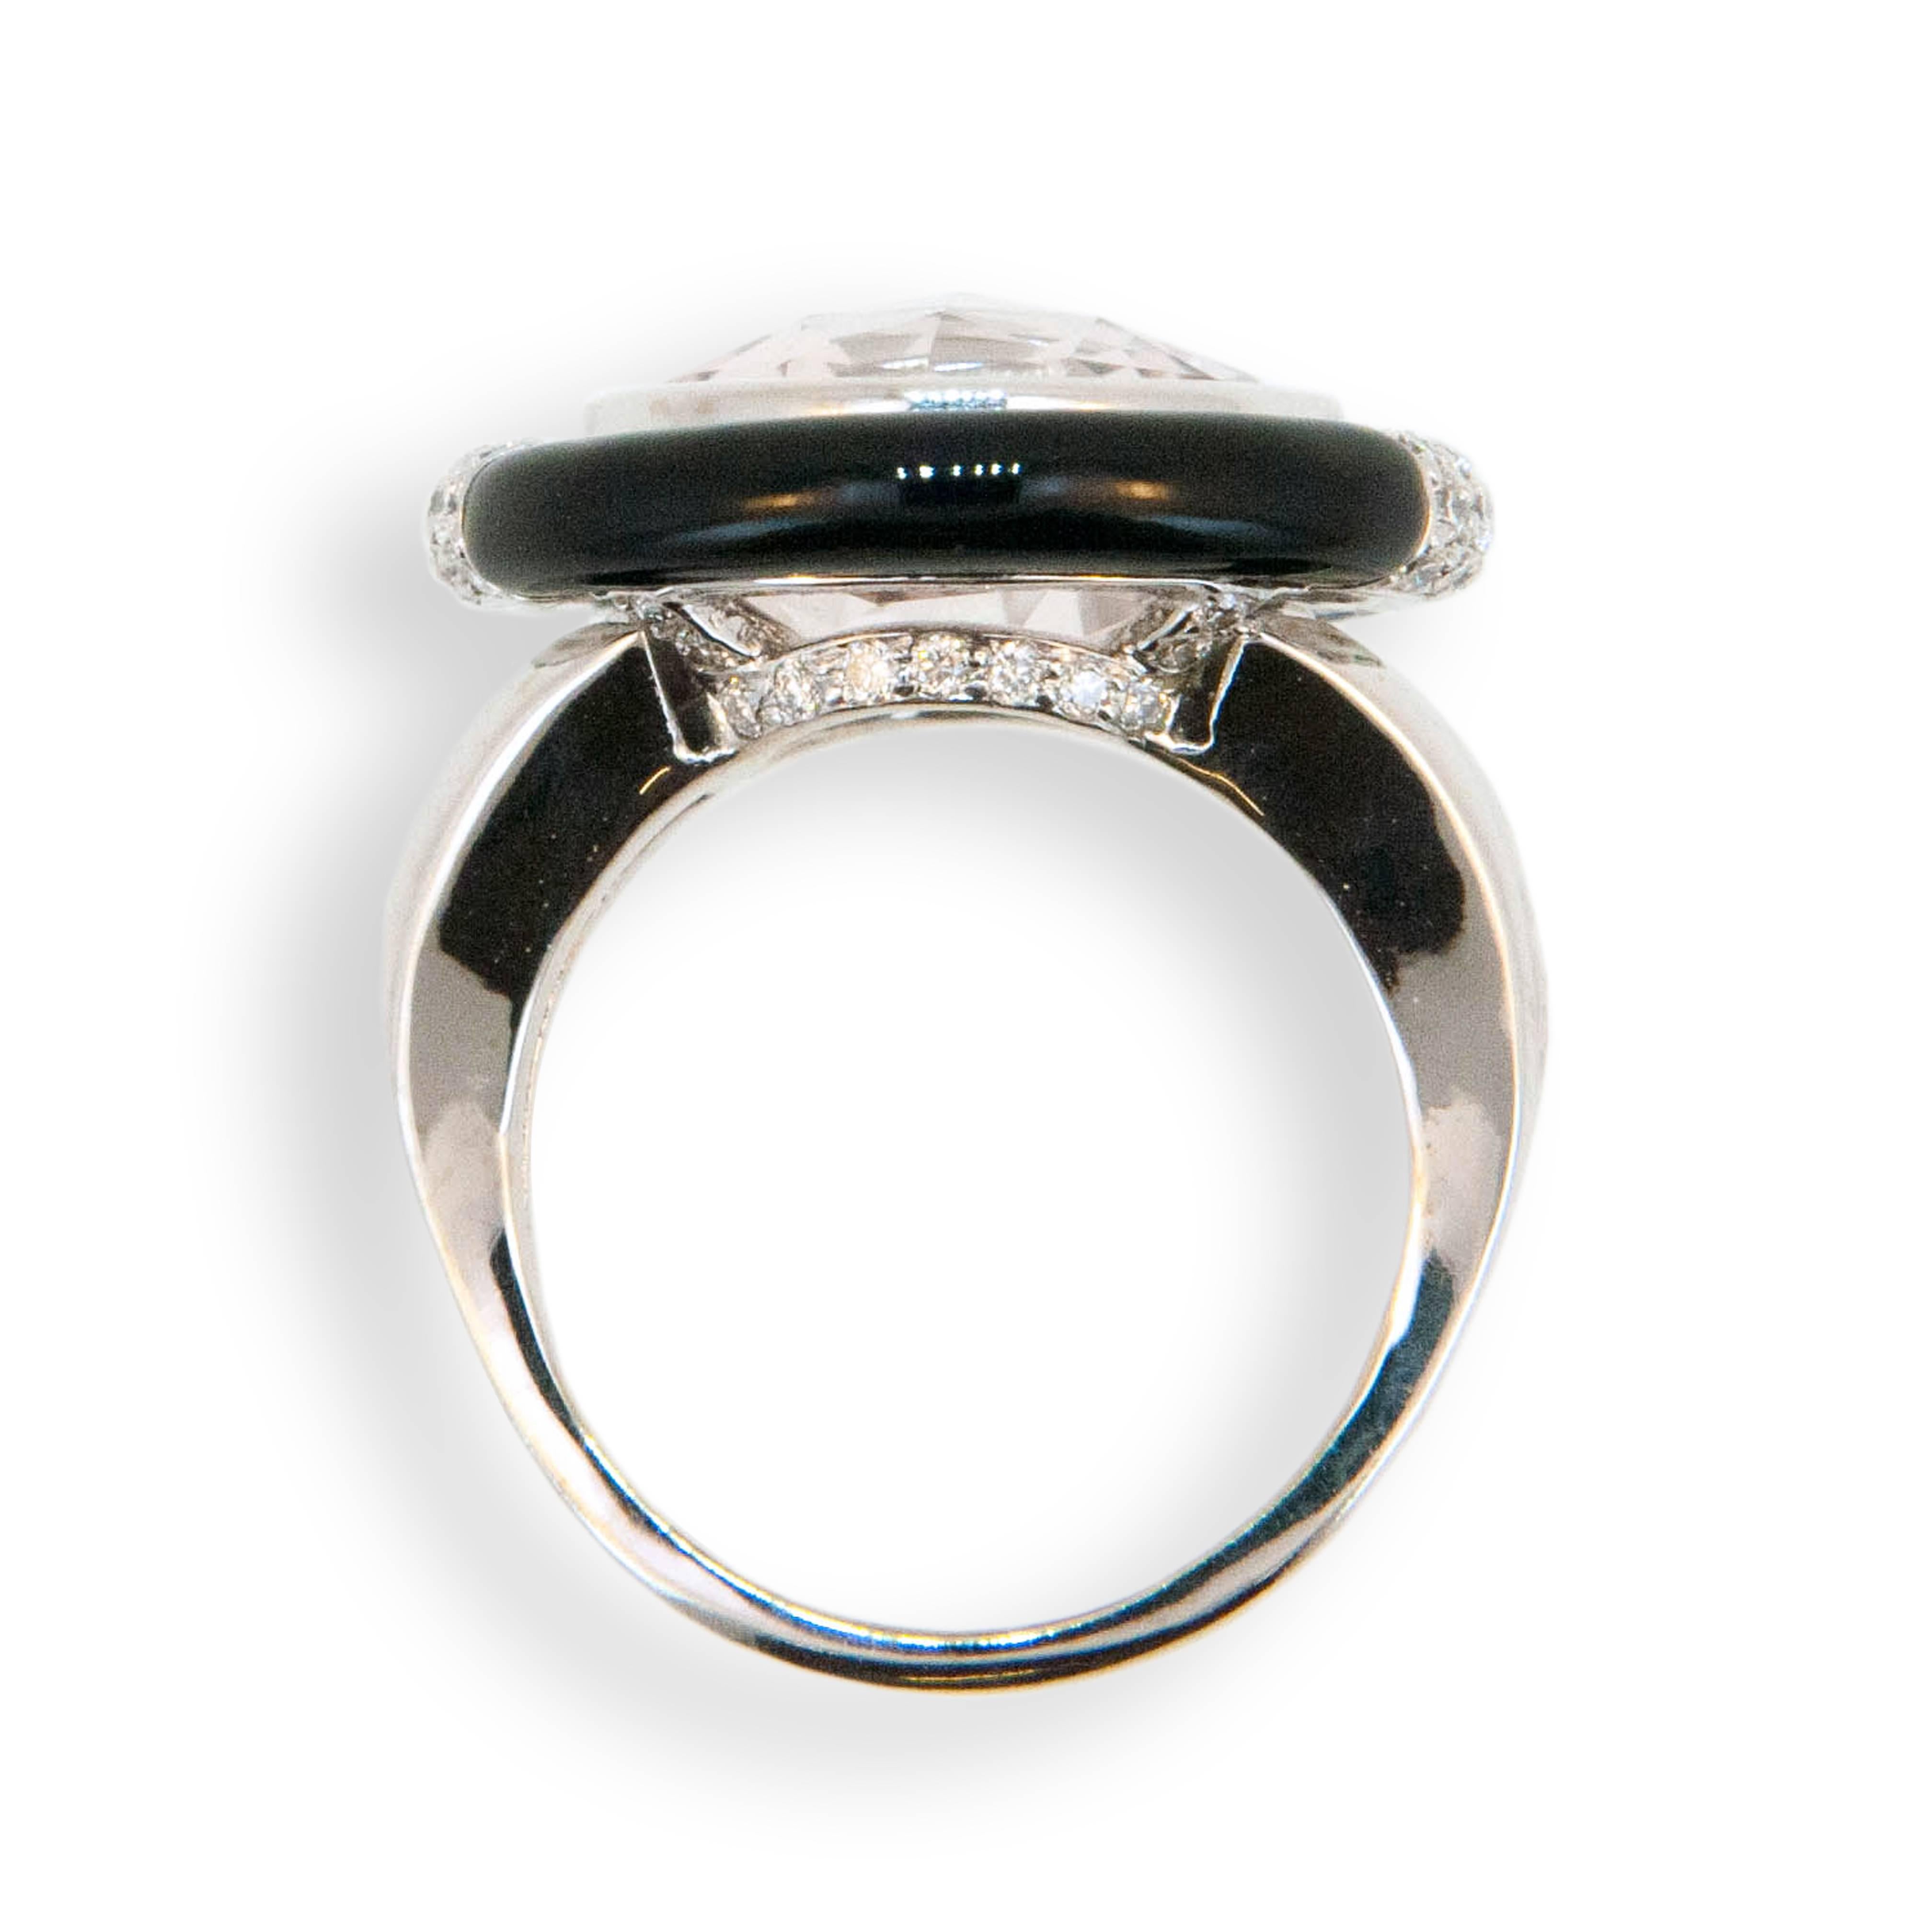 18 karat white gold ring set with one round faceted Morganite 8.65 carats partially surrounded by Black Jade with pave' set diamonds at 3:00 and 9:00 (62) round diamonds .61 carat total weight. Ring is a size 6.75.